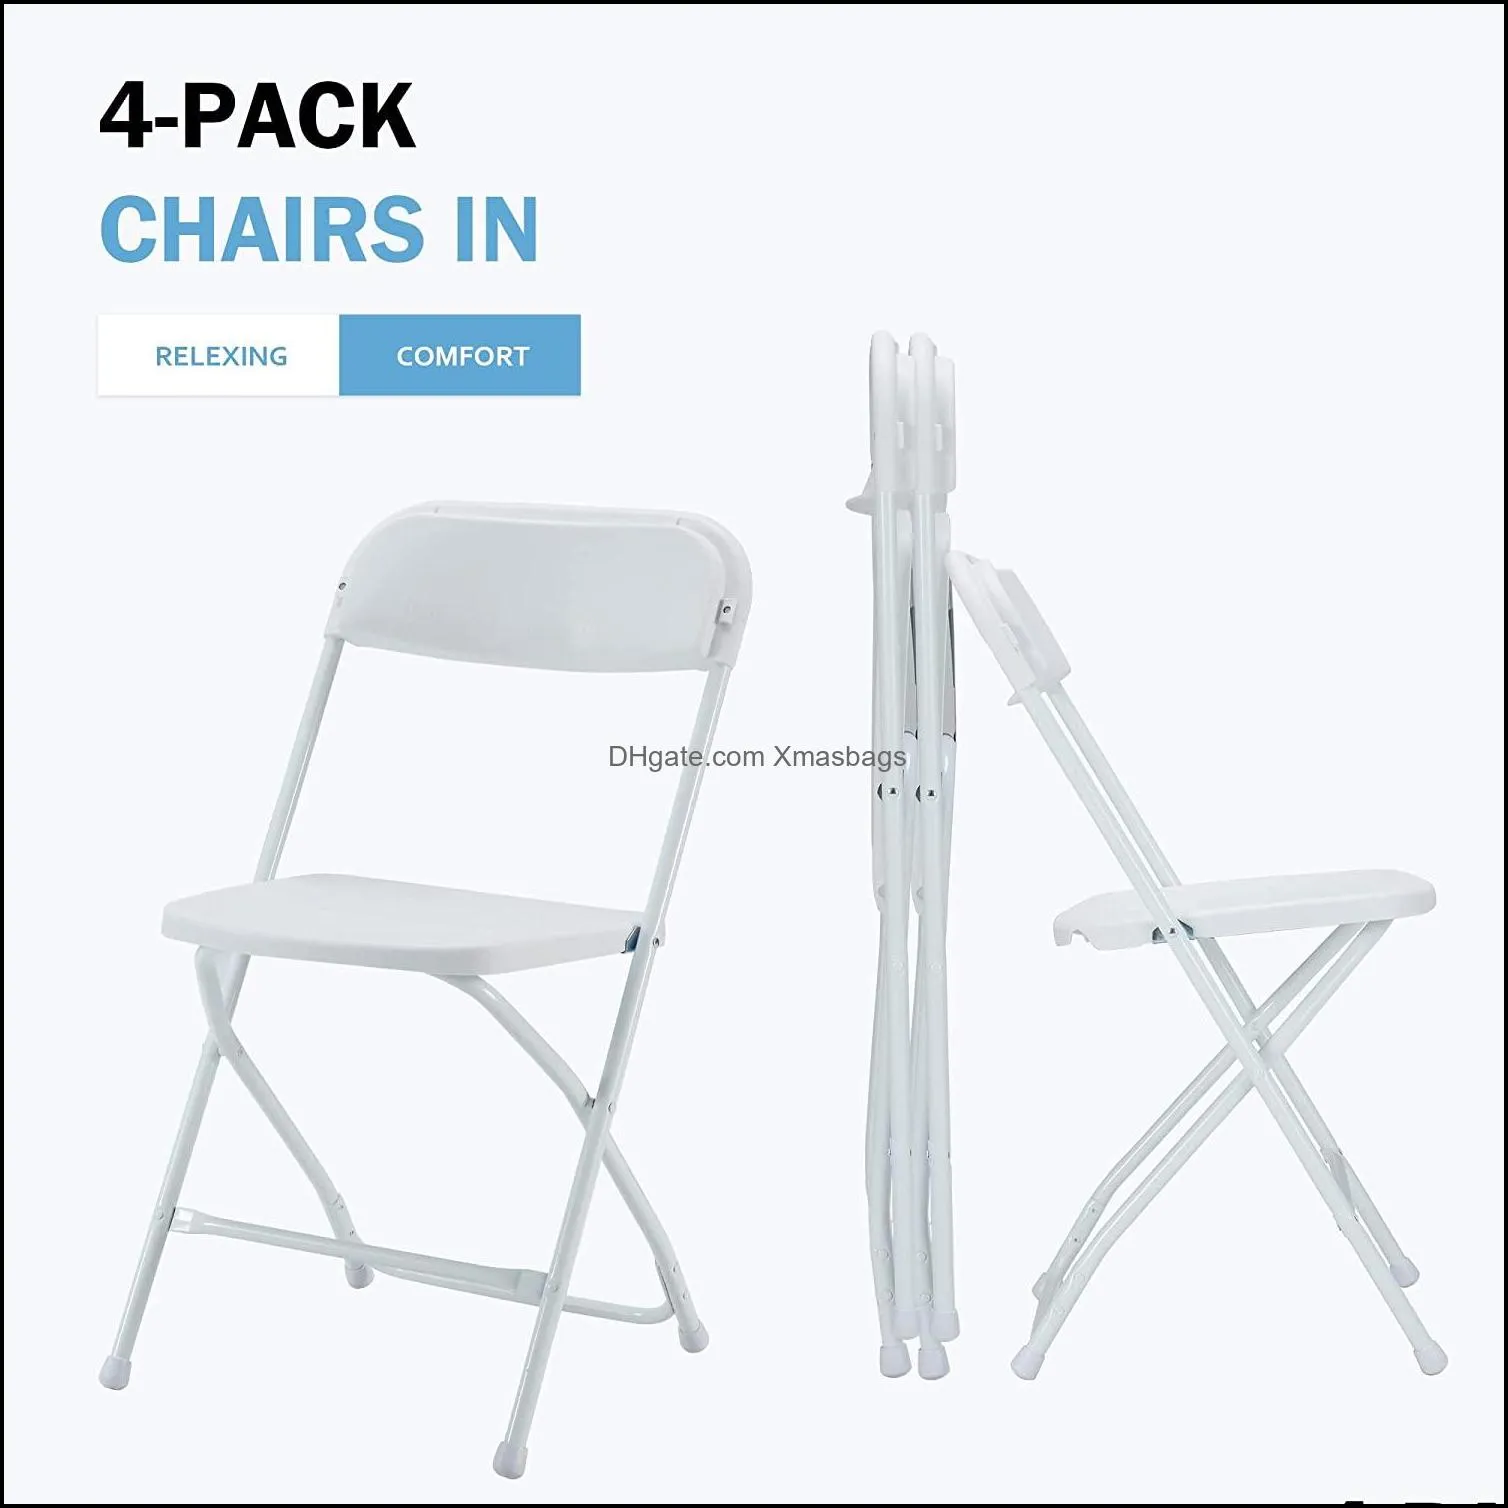 4 pack white folding chairs plastic outdoor party chairs stackable lightweight for event wedding office meeting house dinner 330 lbs weight